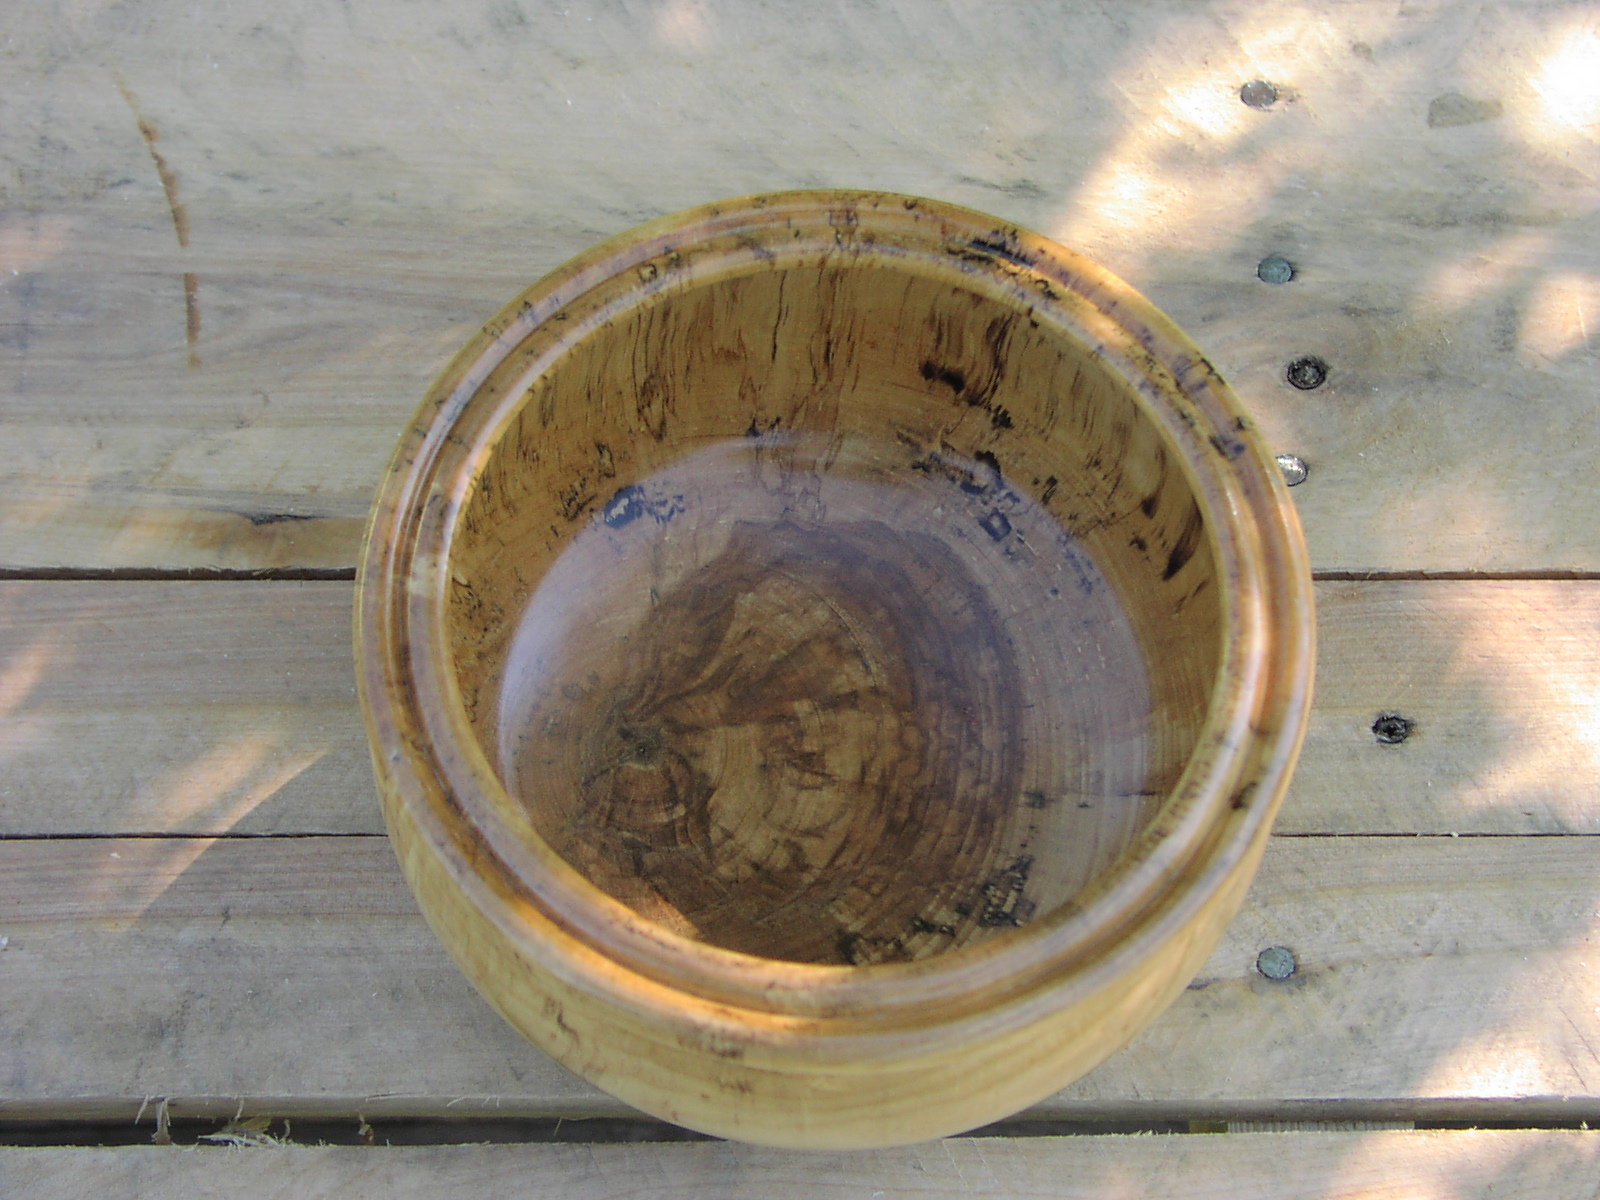 Spalted Birch Bowl Actual size=240 pixels wide